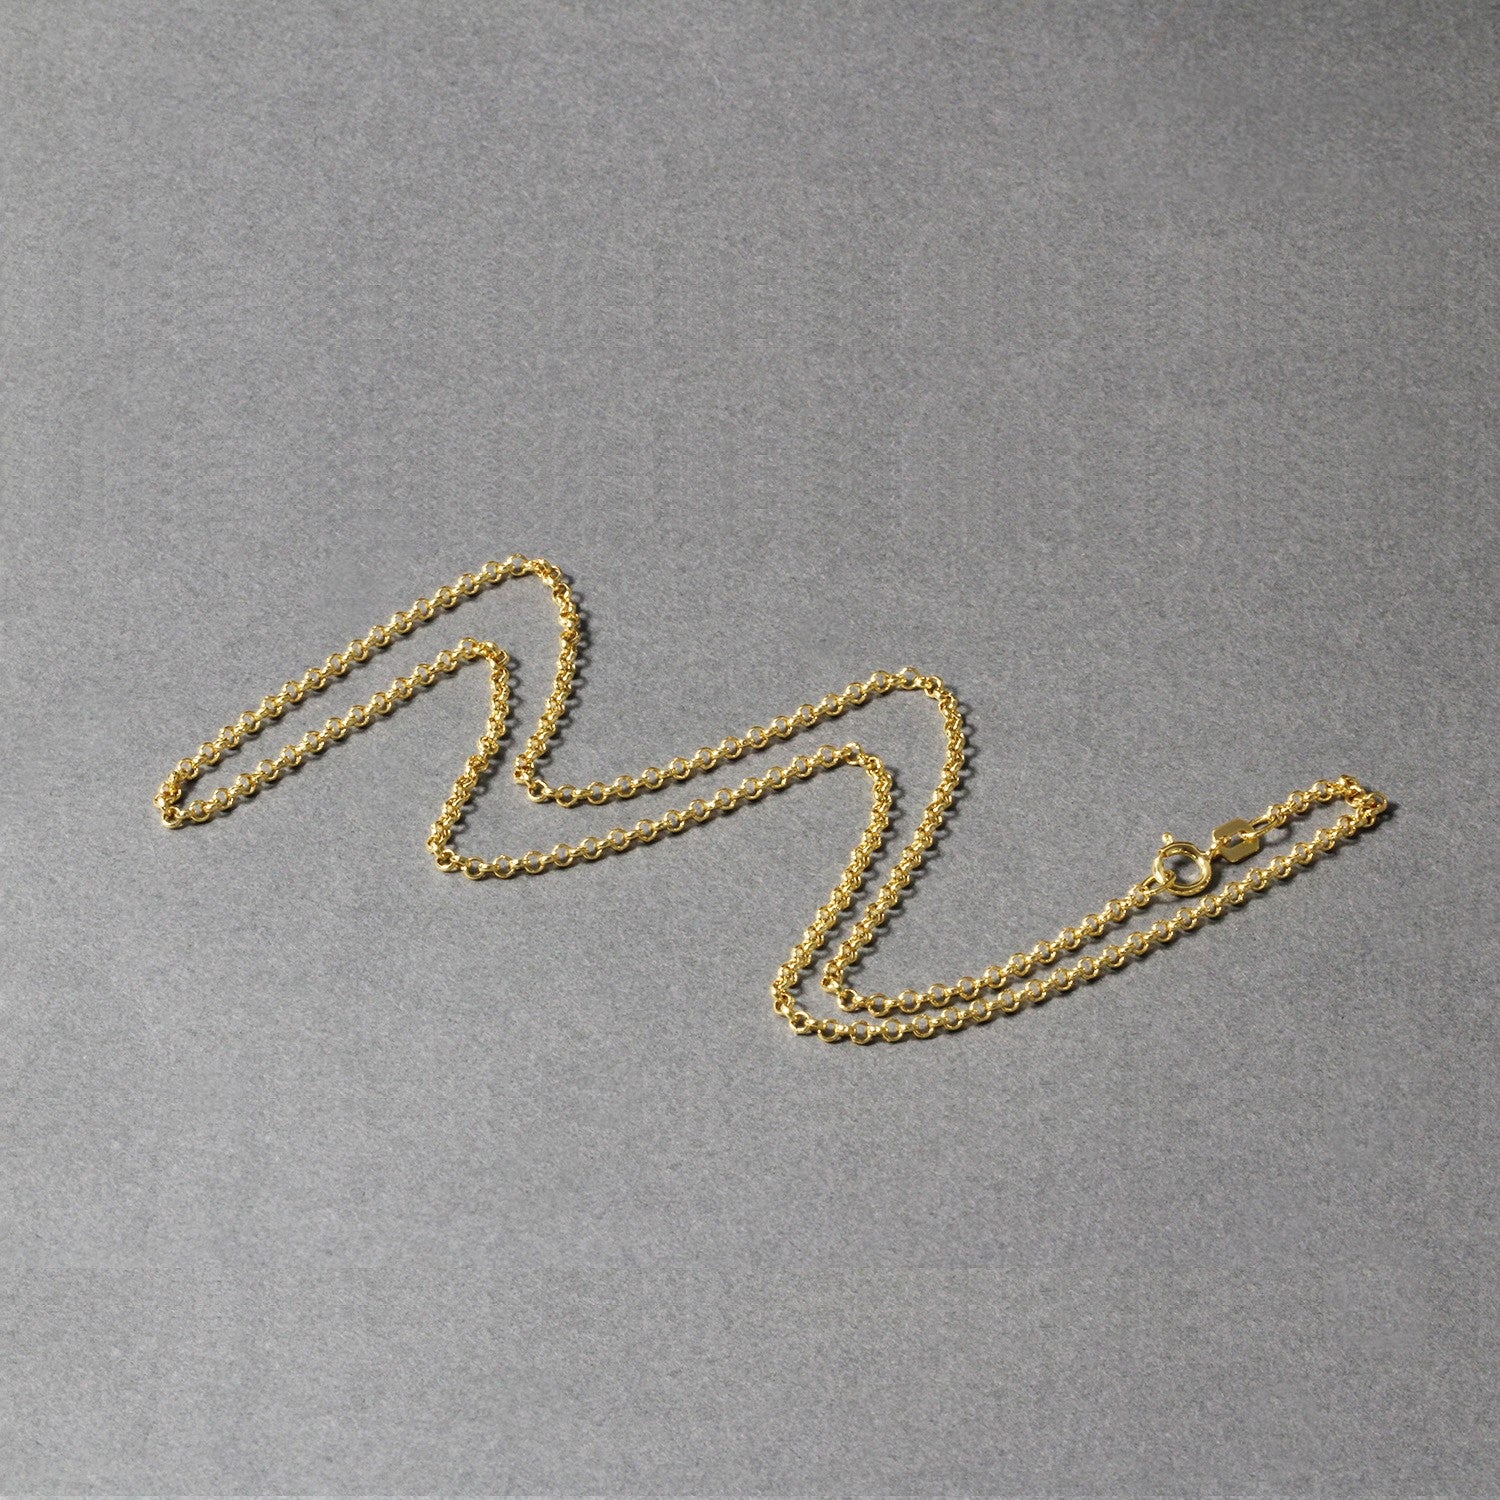 10k Yellow Gold Rolo Chain  (1.90 mm) 